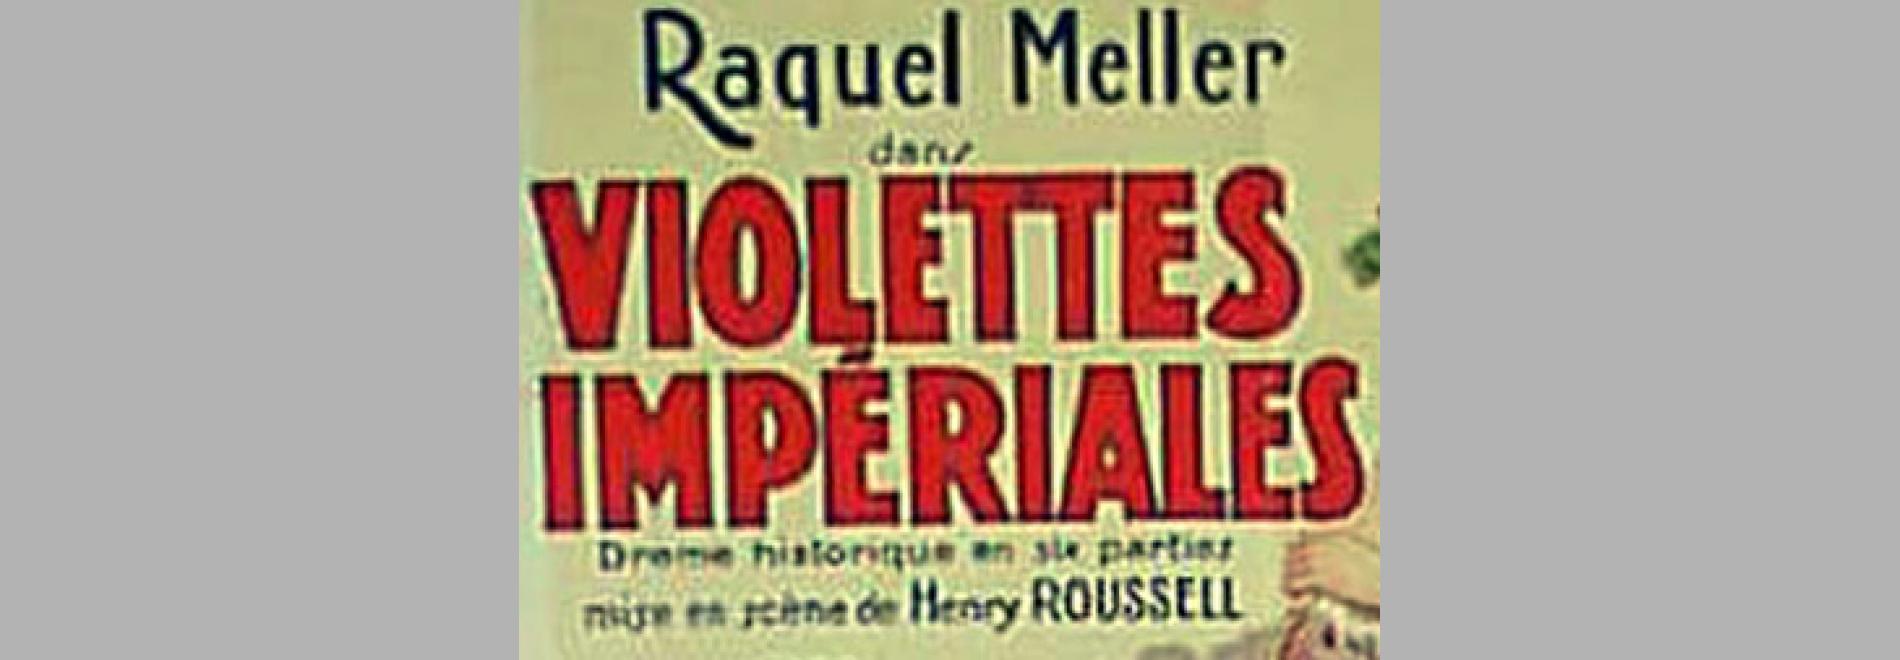 Violettes imperiales (Henry Roussell, 1923)